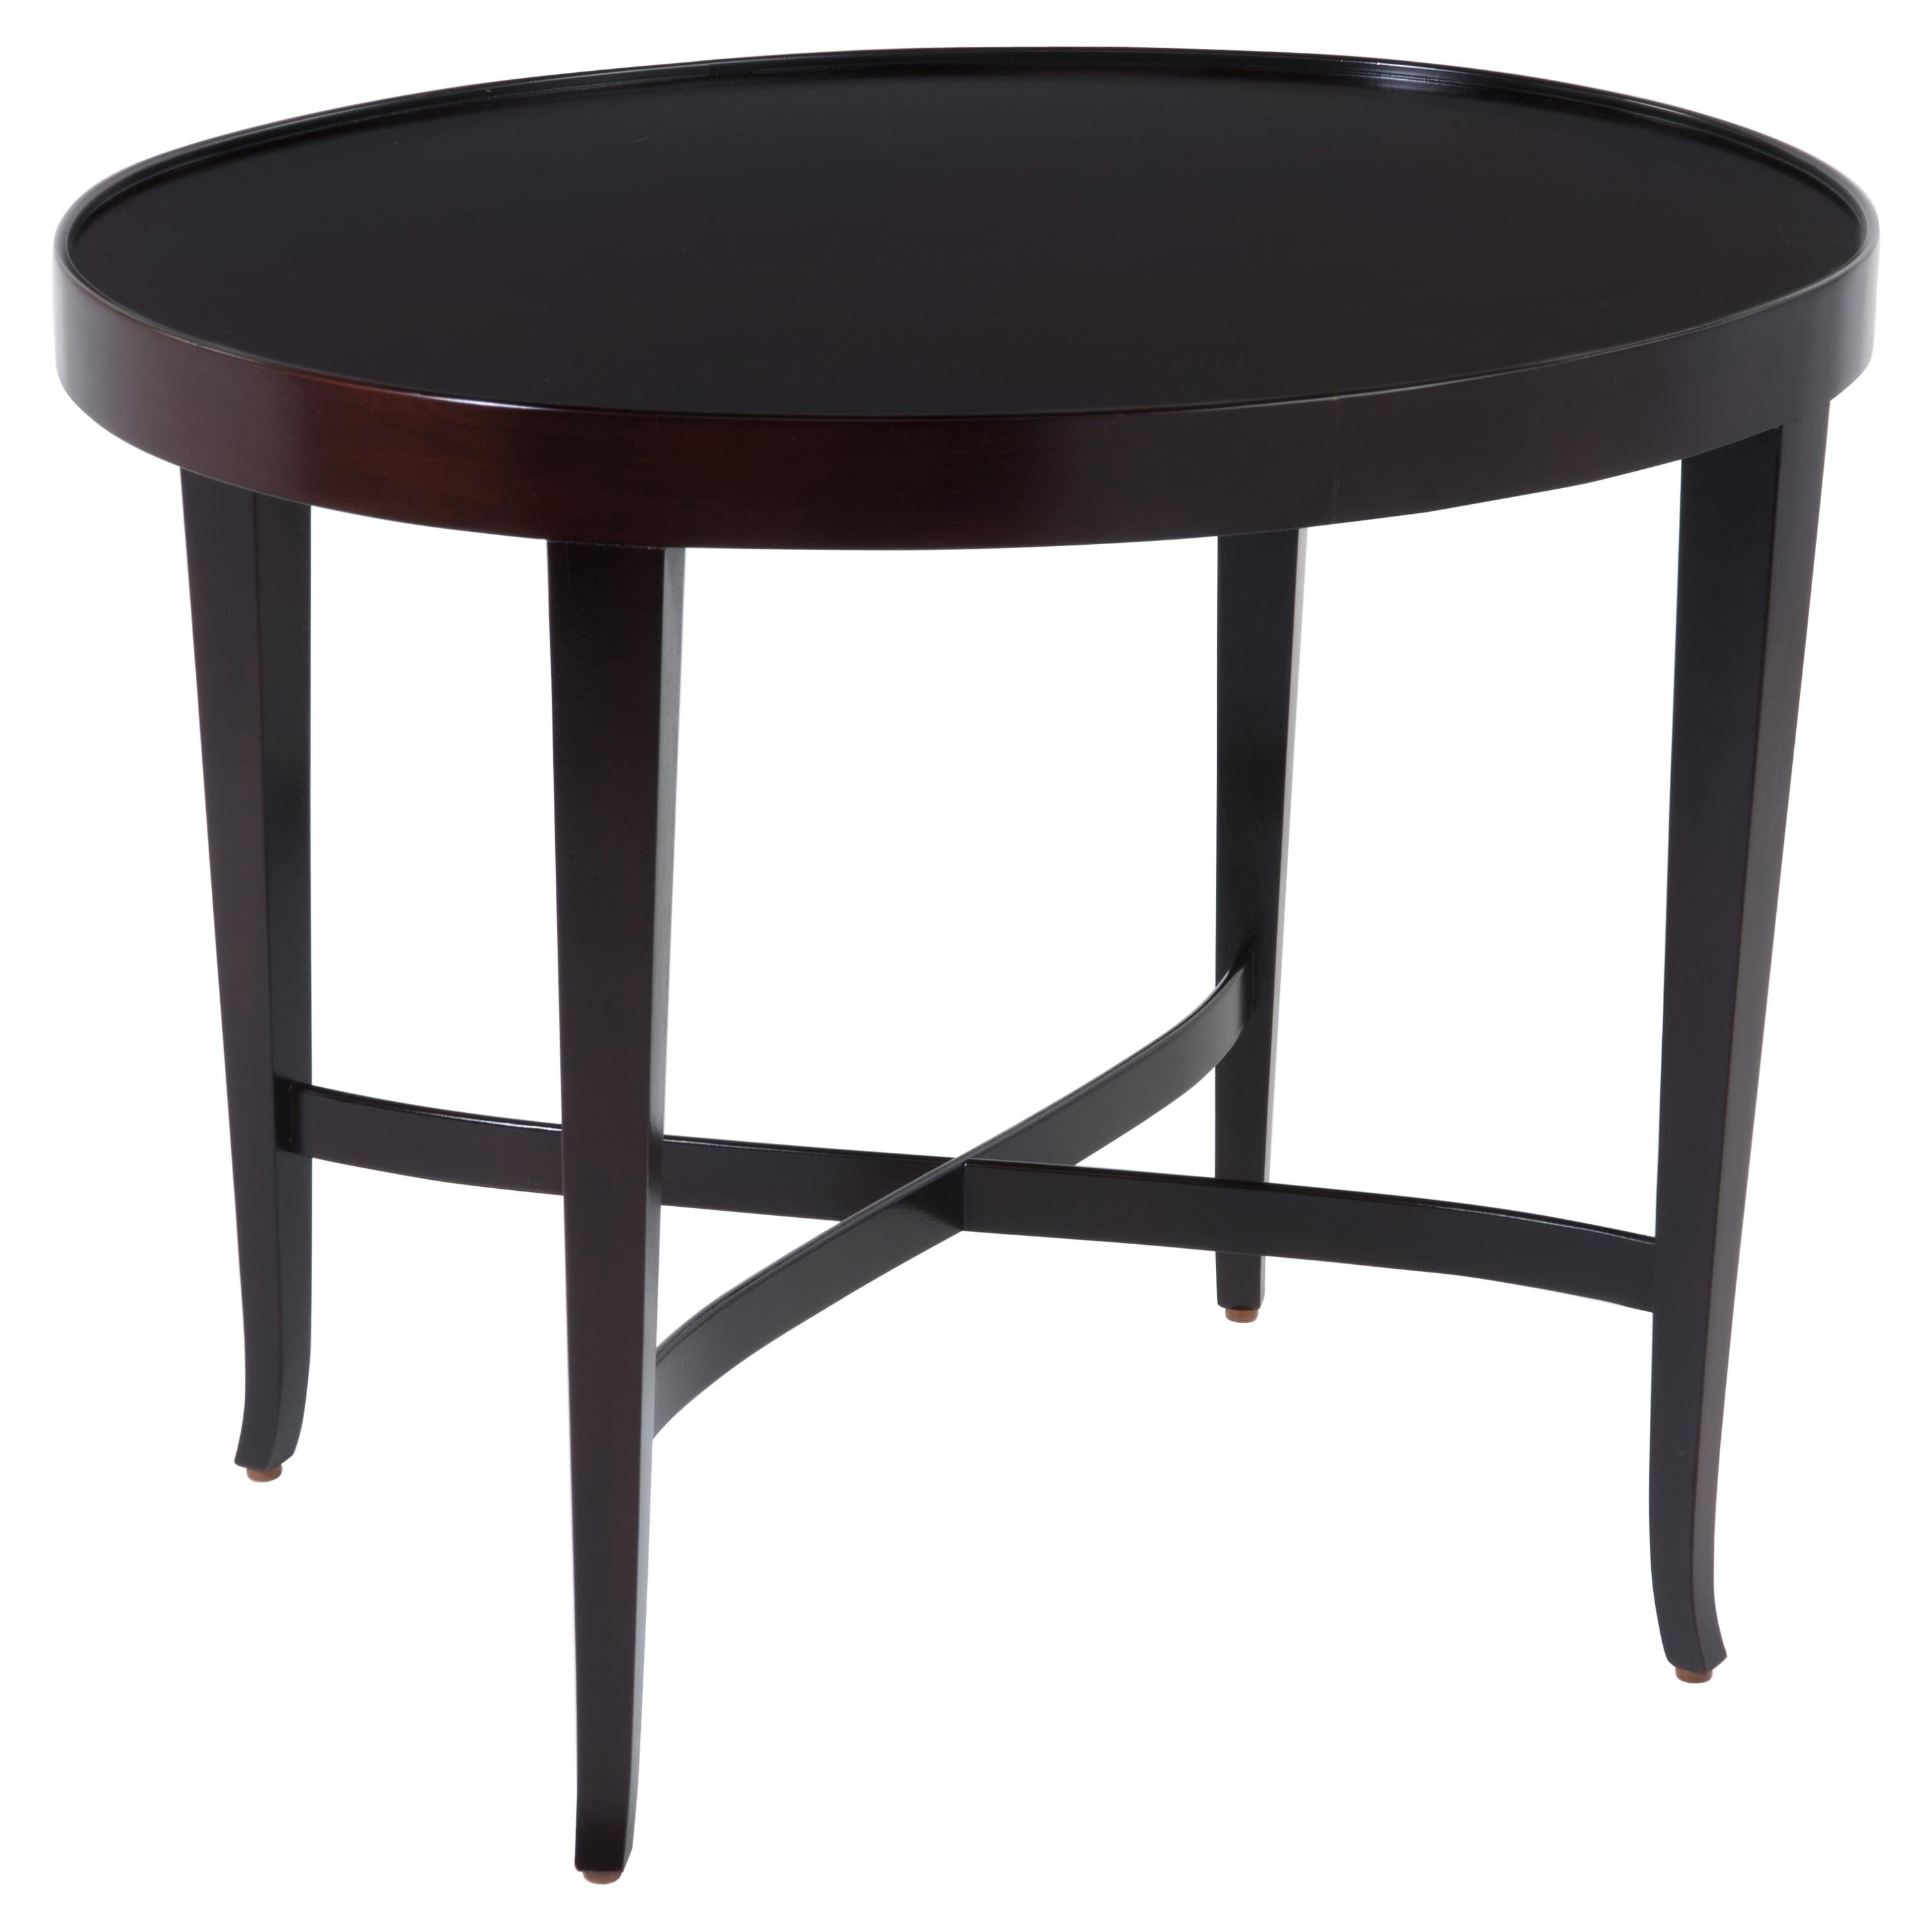 Barbara Barry Baker Oval Occasional Side End Table